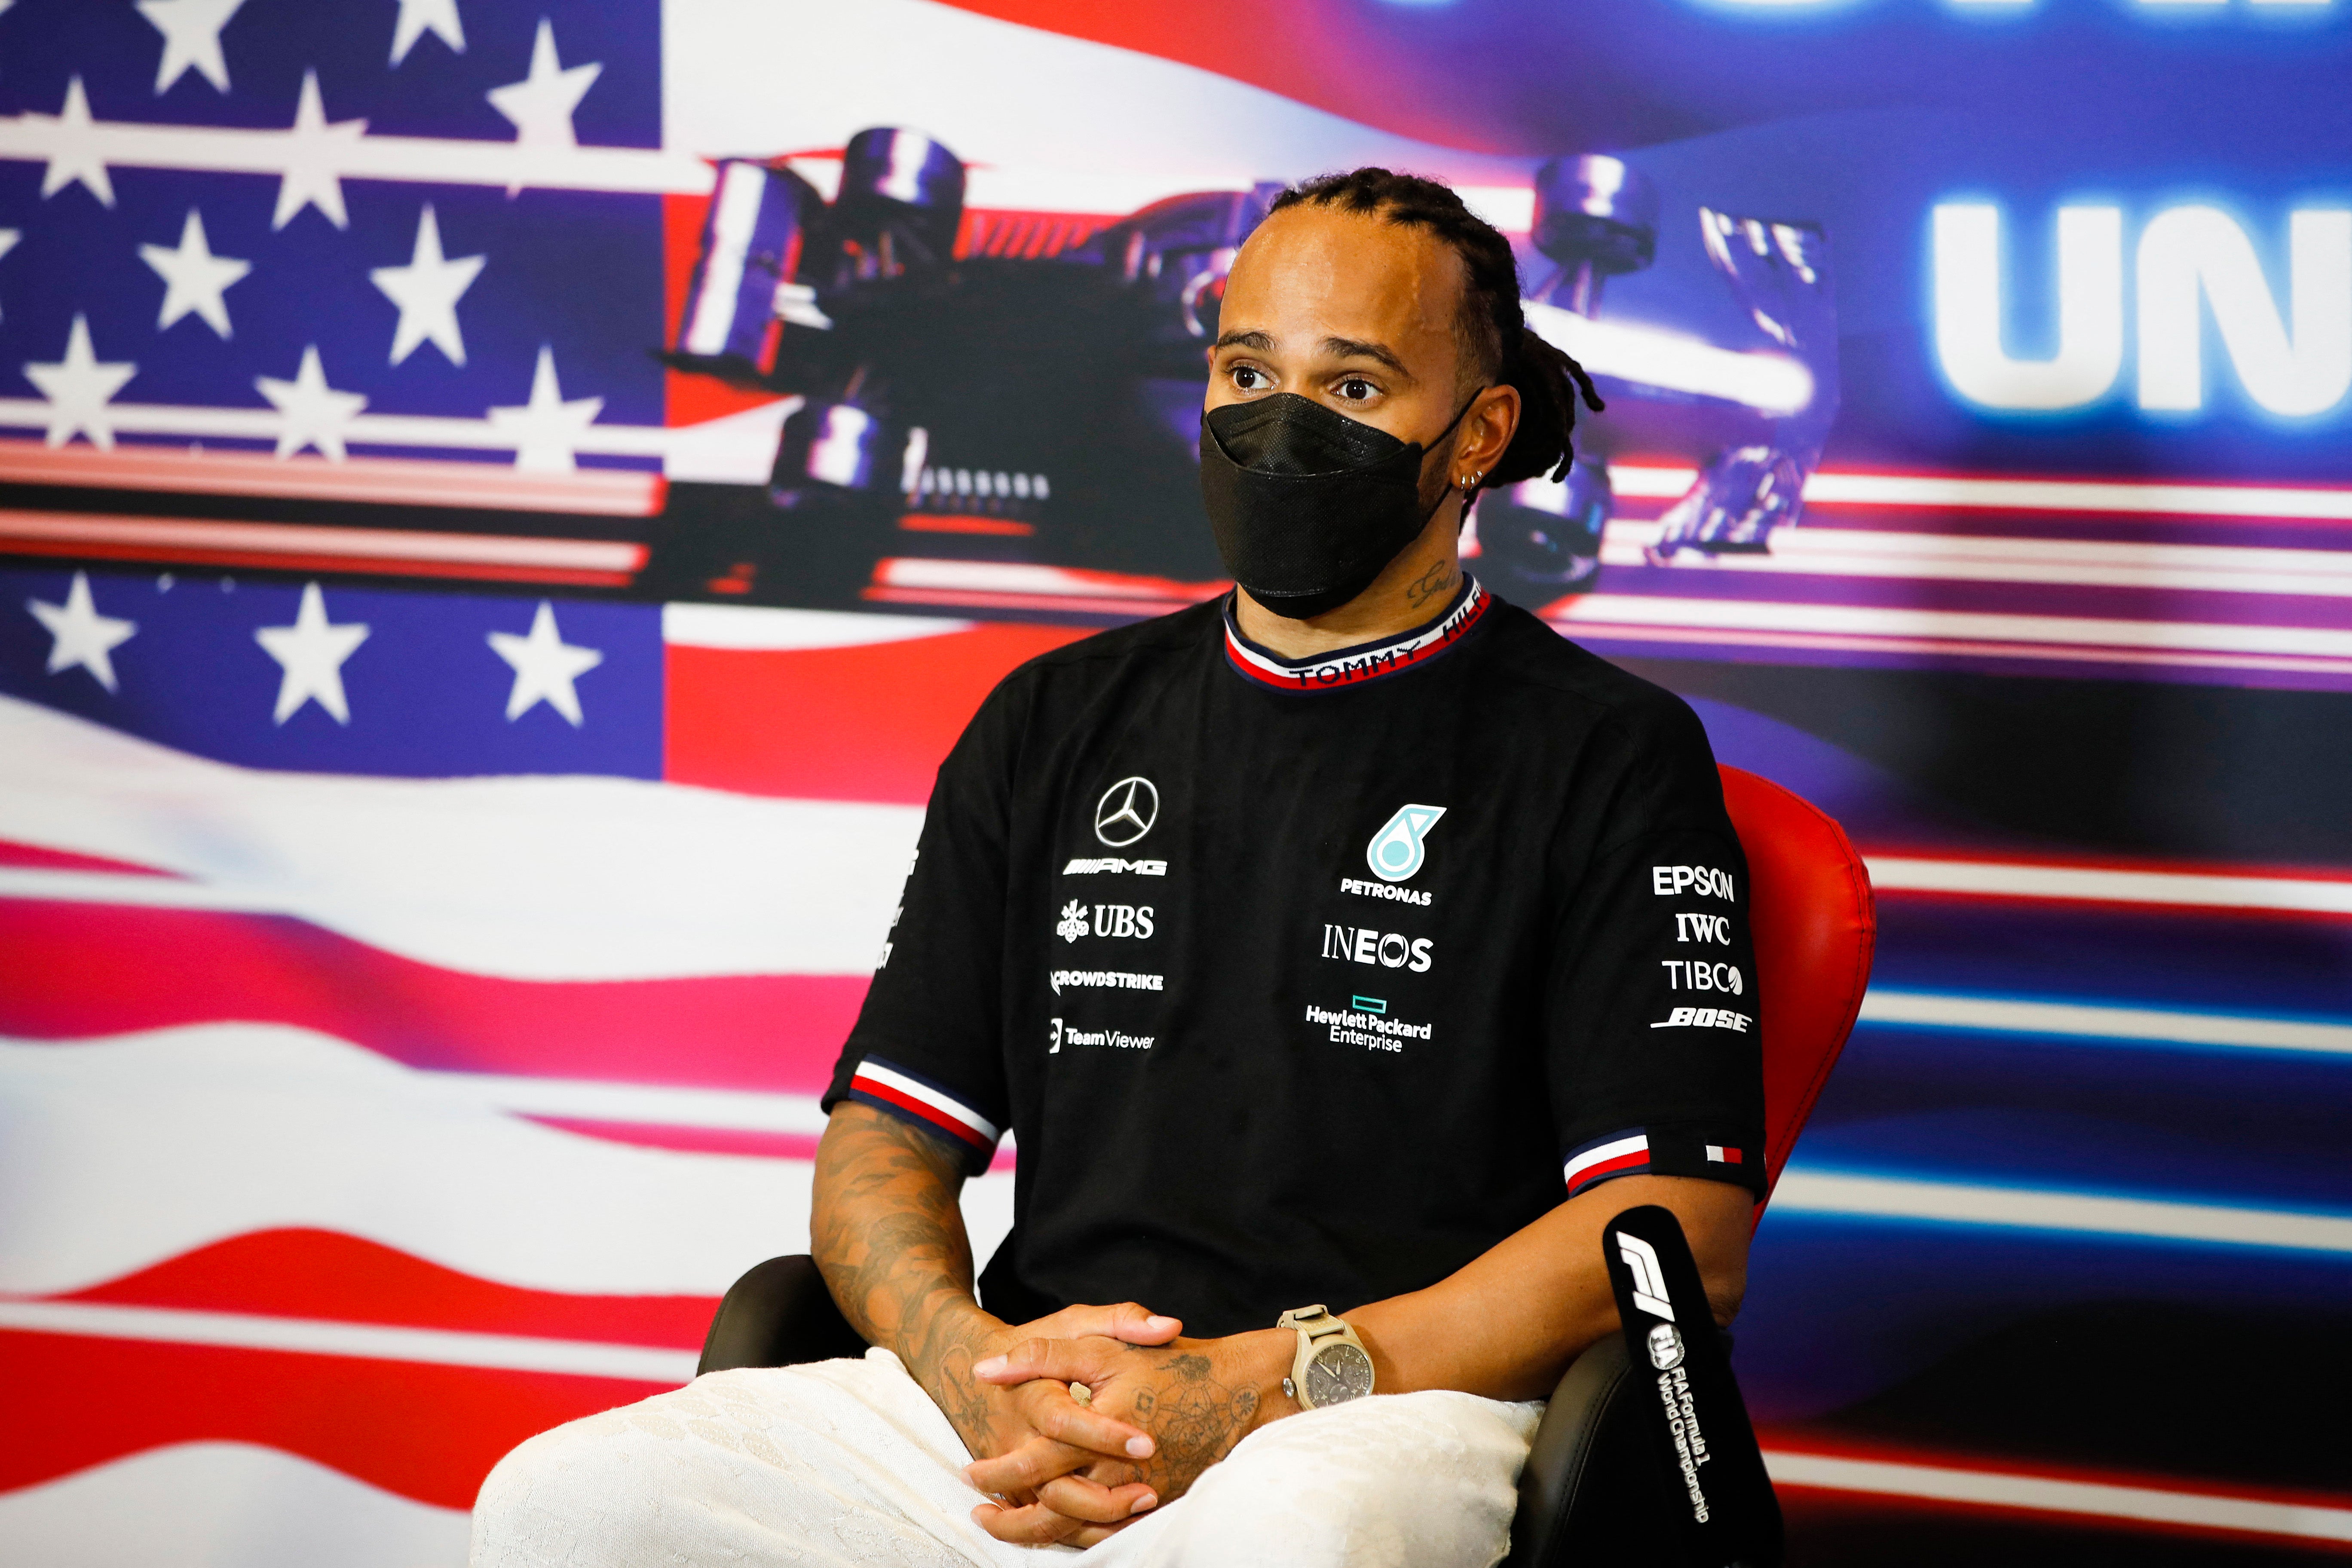 Lewis Hamilton speaks to the media after the US Grand Prix